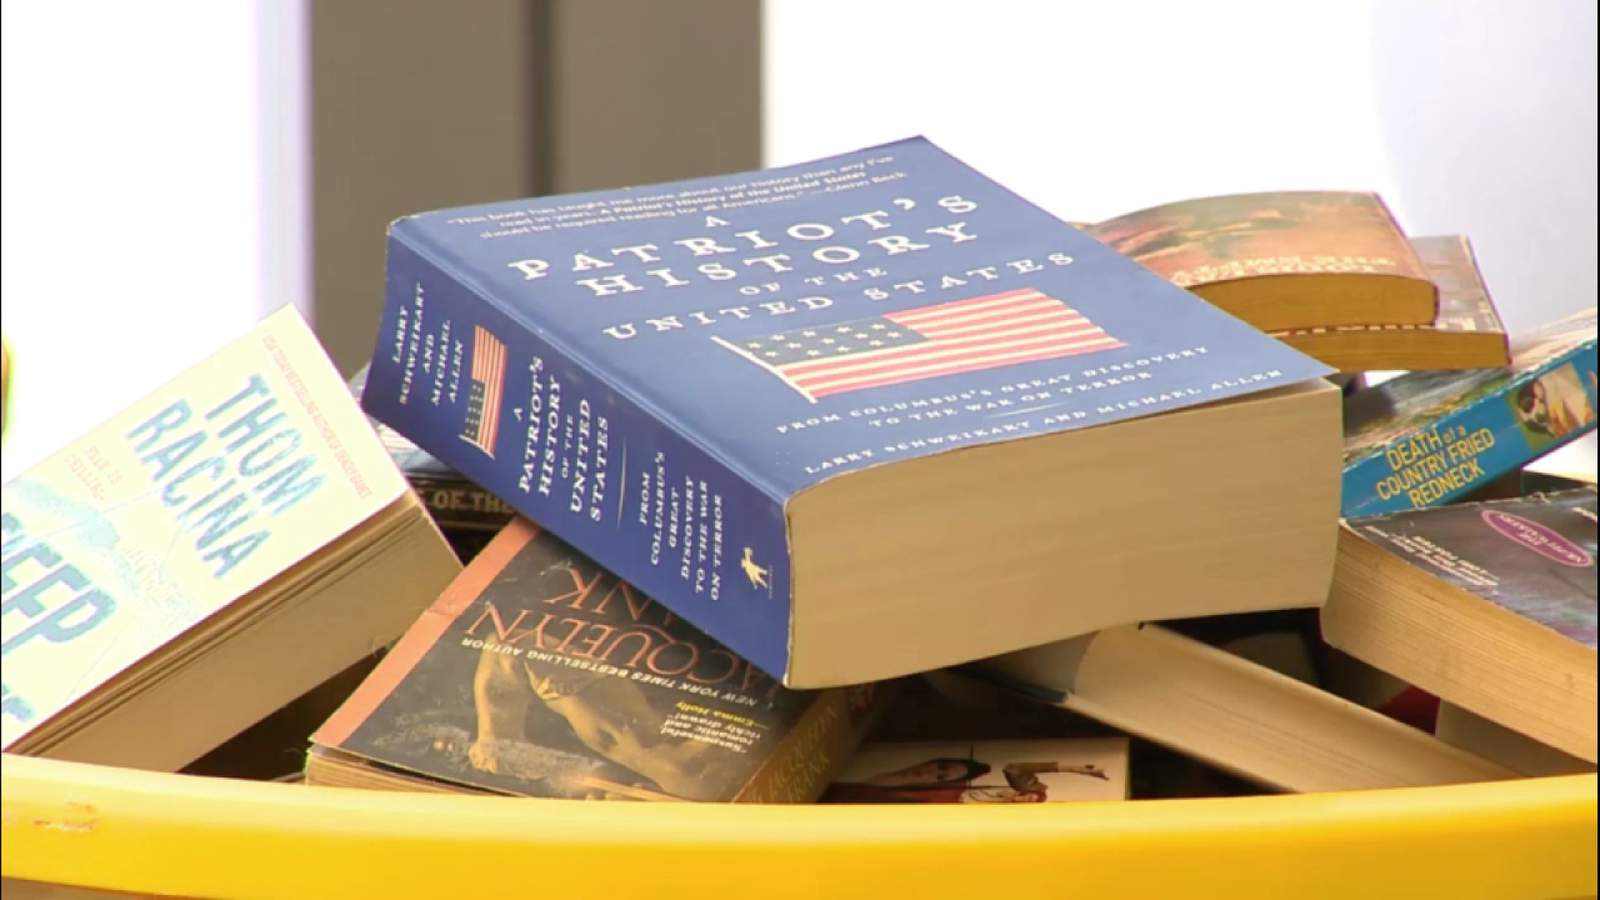 Operation Paperback is collecting books to send to American troops overseas